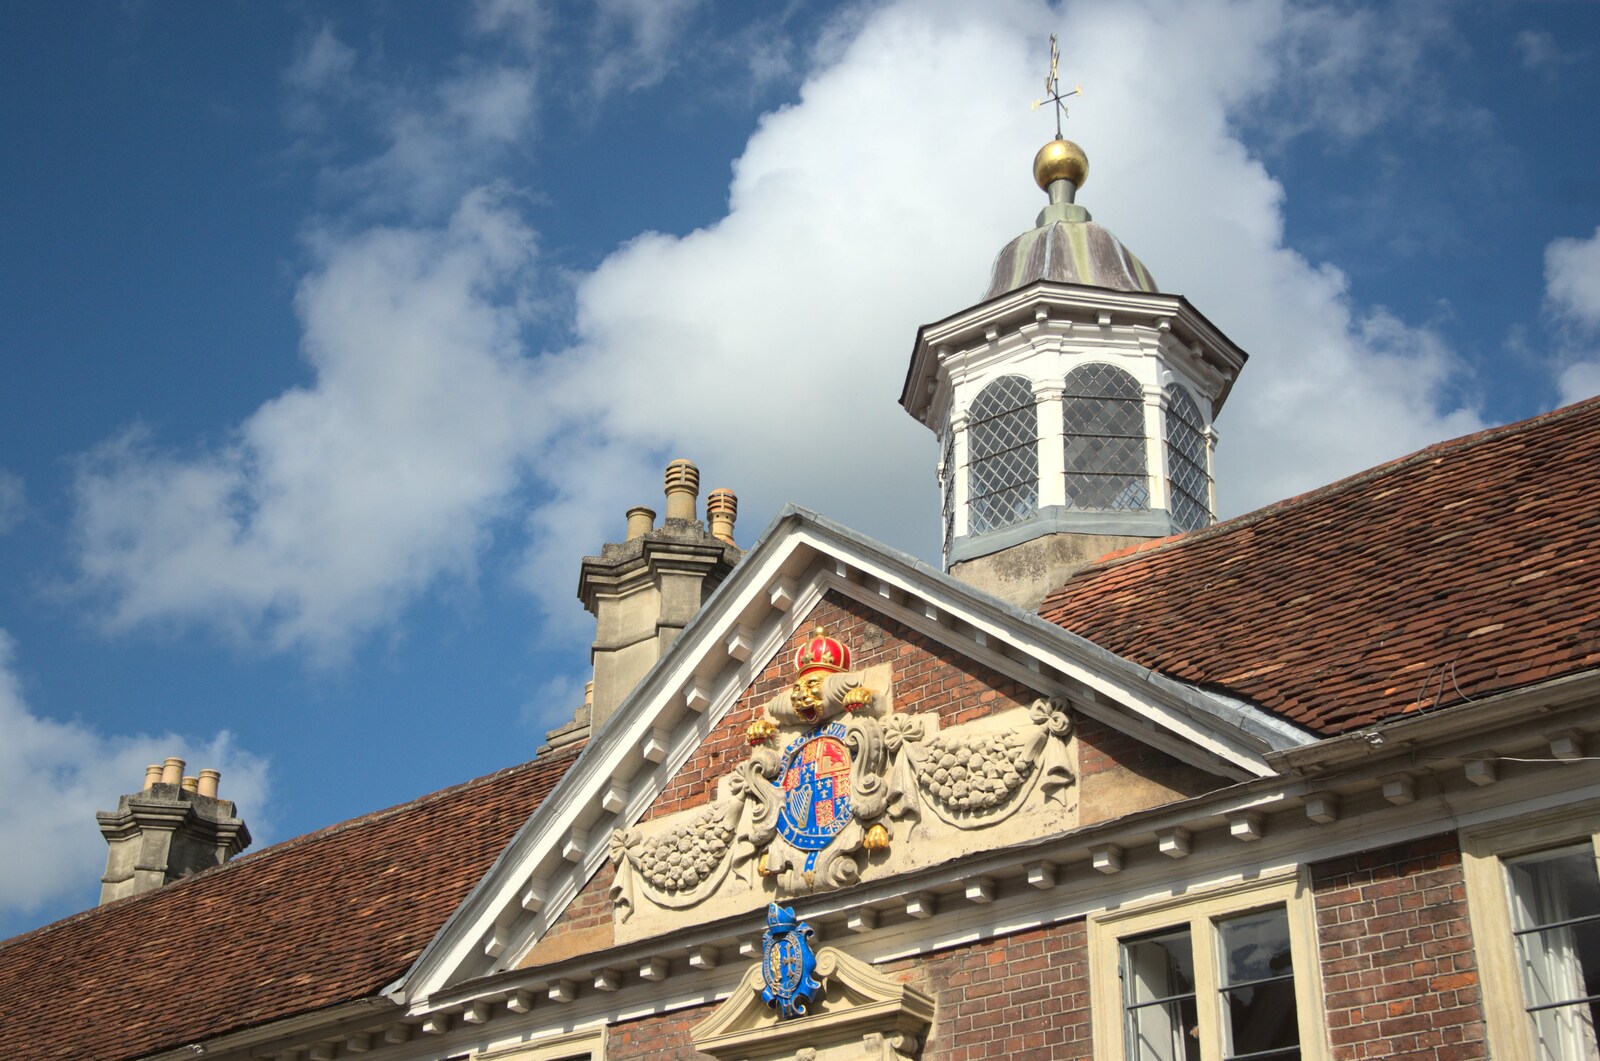 A nice crest on a building from A Camper Van Odyssey: Oxford, Salisbury, New Forest and Barton-on-Sea - 19th June 2011